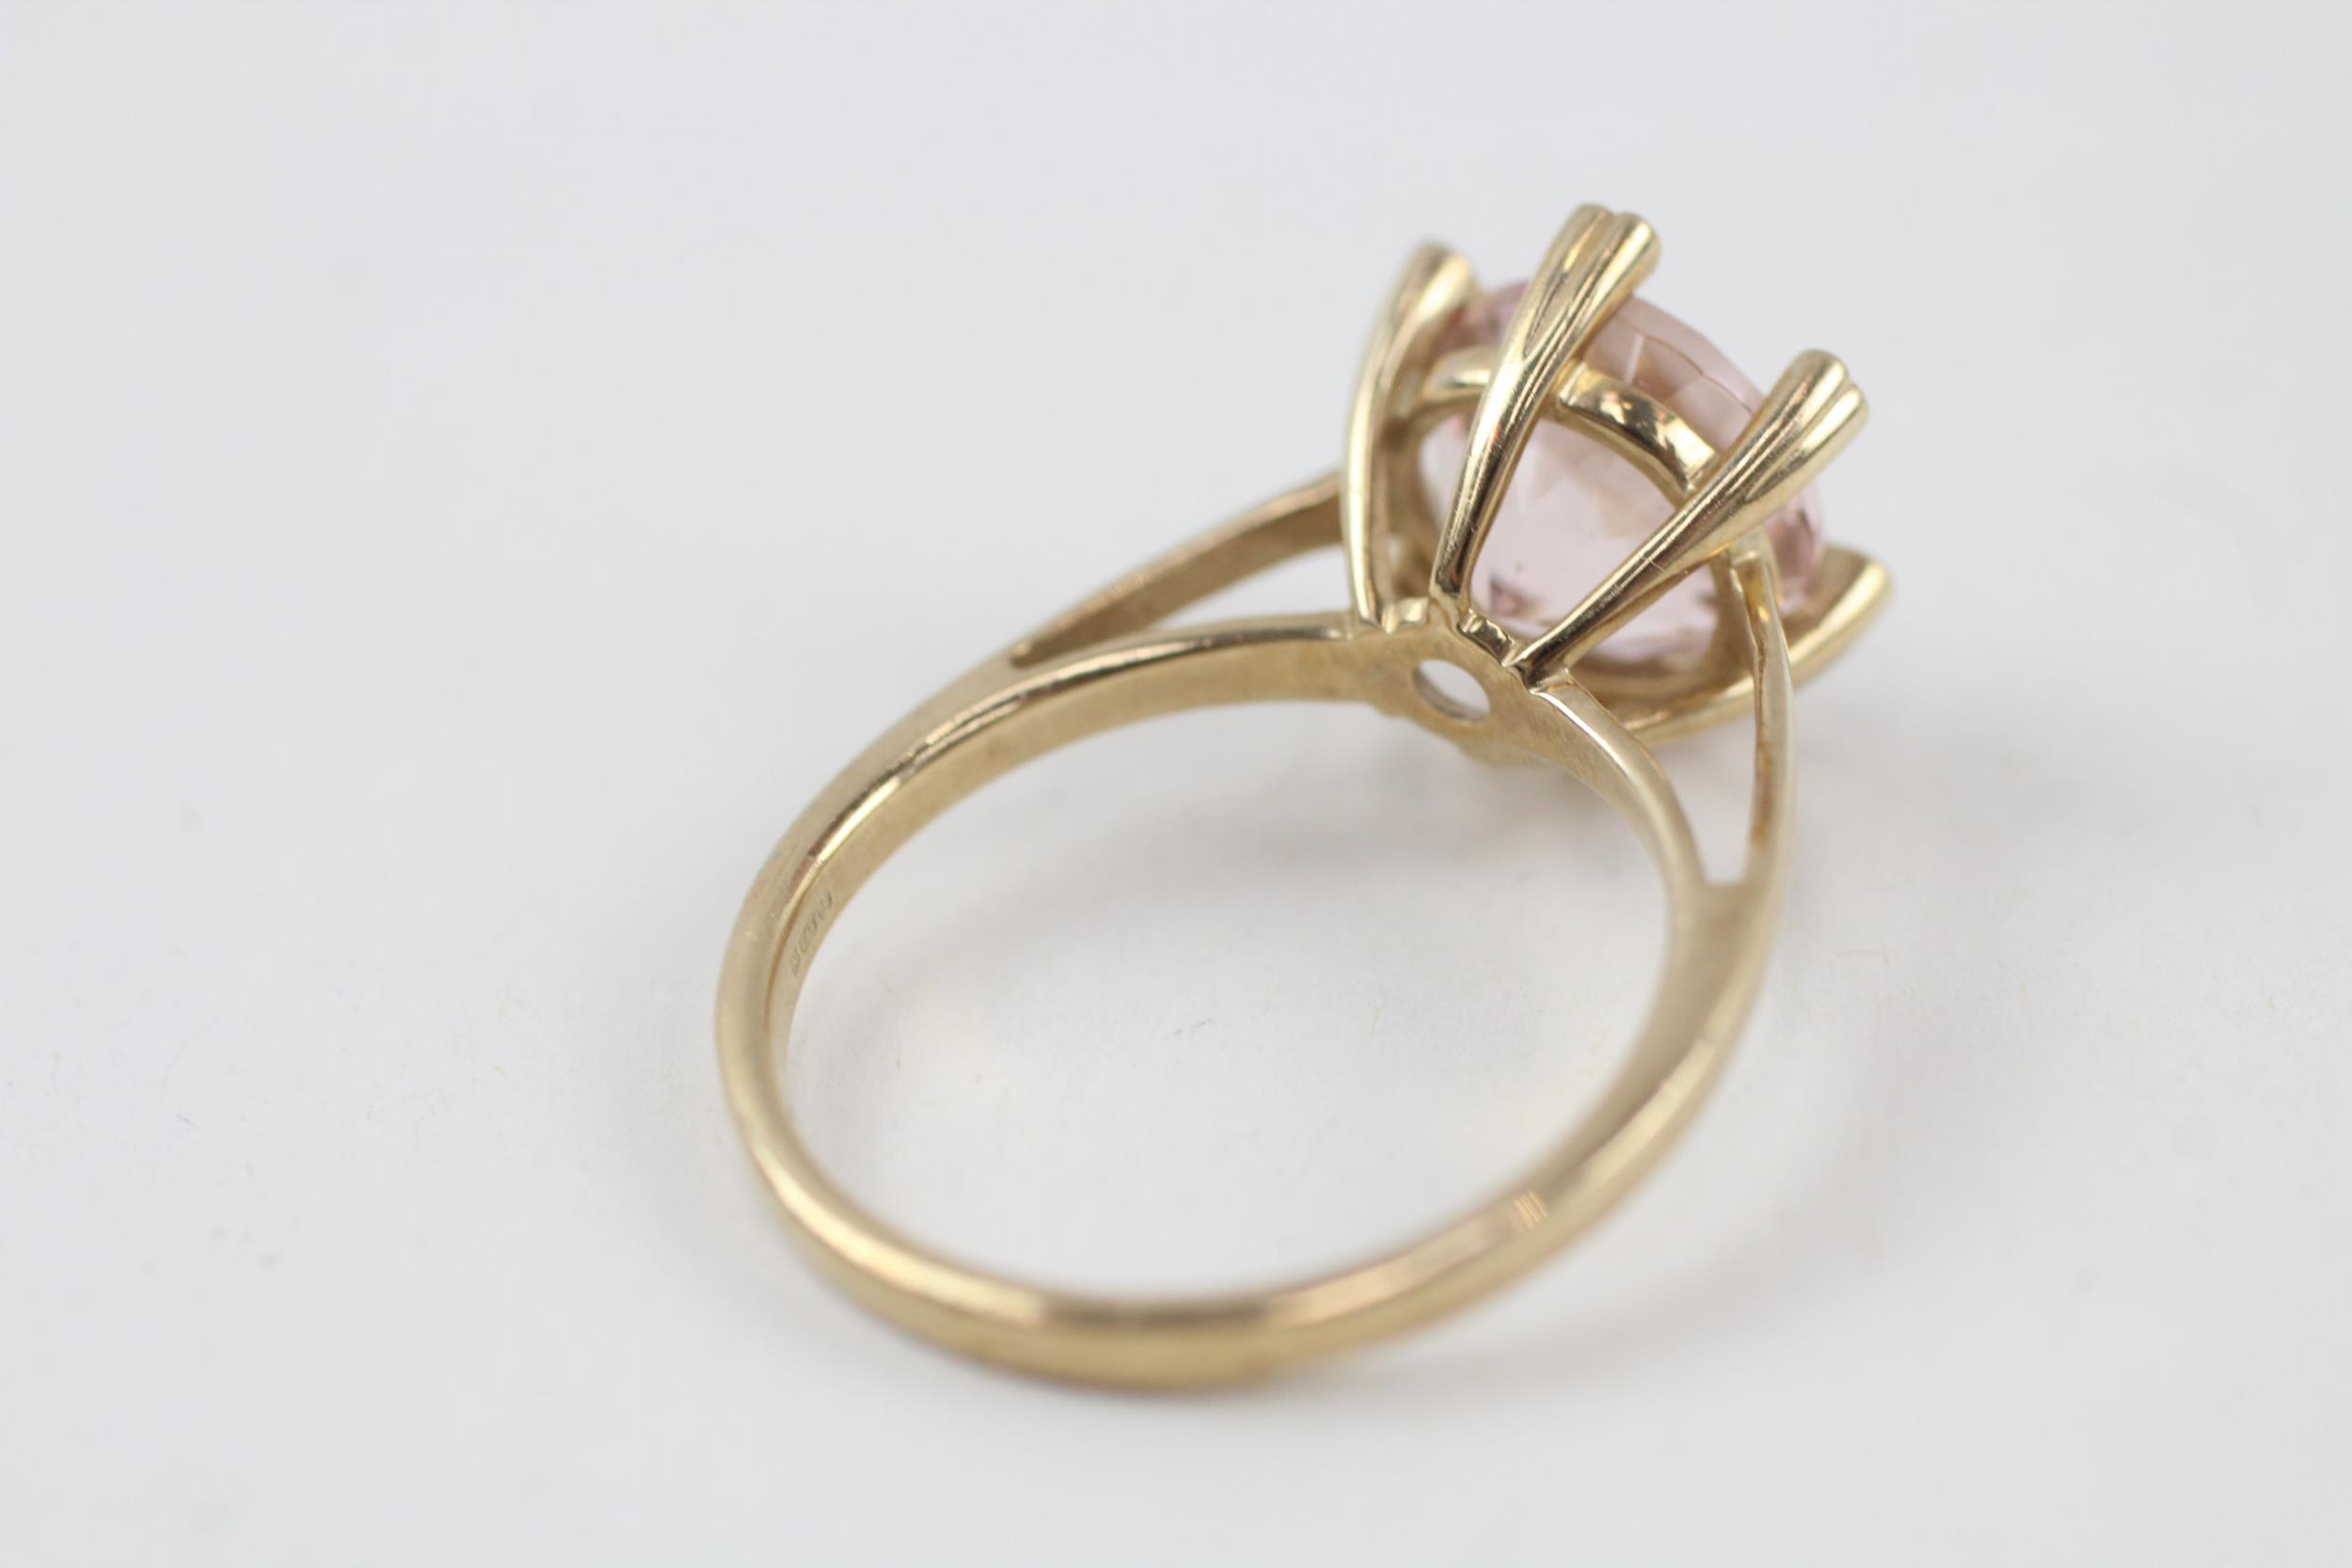 9ct gold morganite dress ring with heart shaped diamond claws (3.1g) Size N - Image 6 of 6